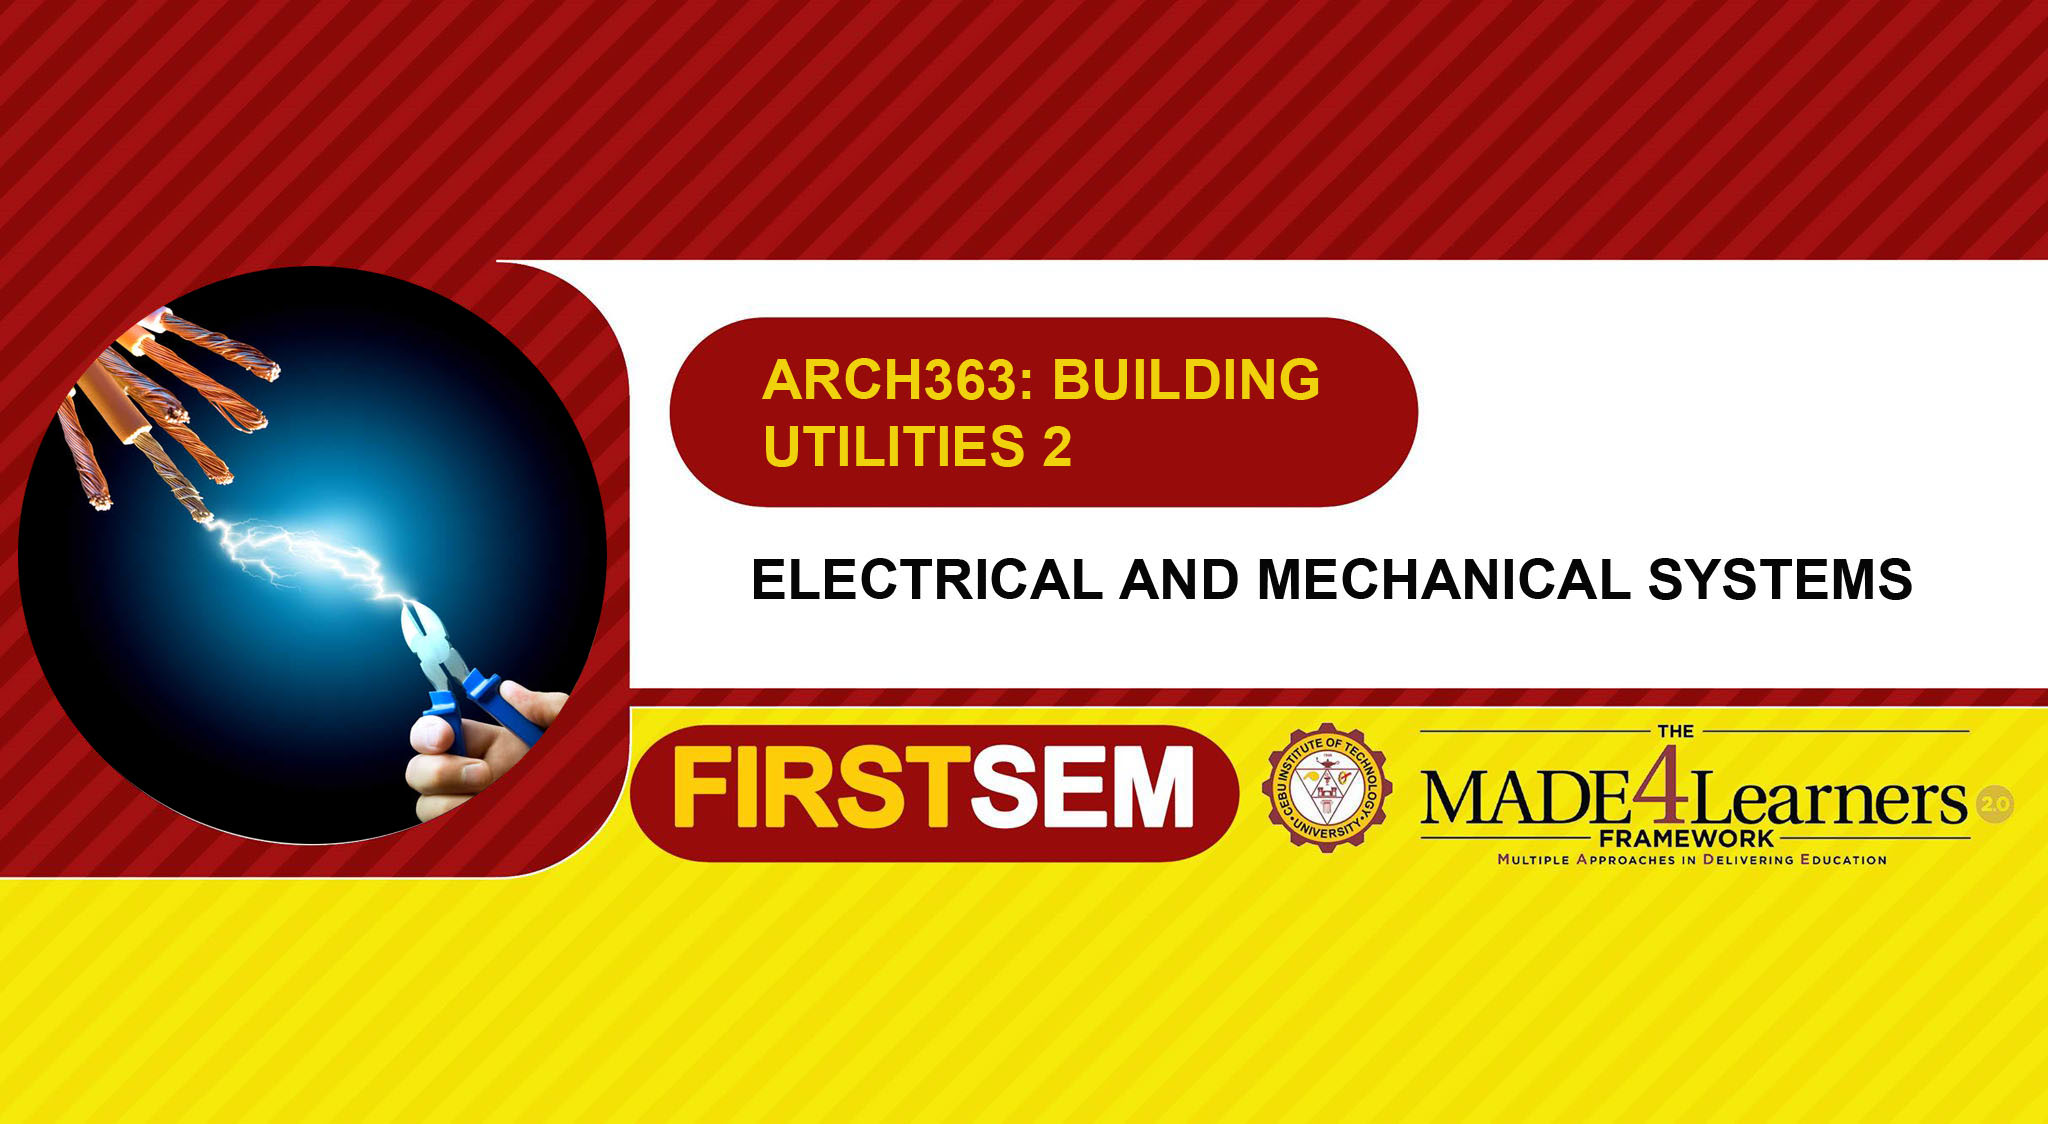 ARCH363: BUILDING UTILITIES 2 -  Electrical and Mechanical Systems